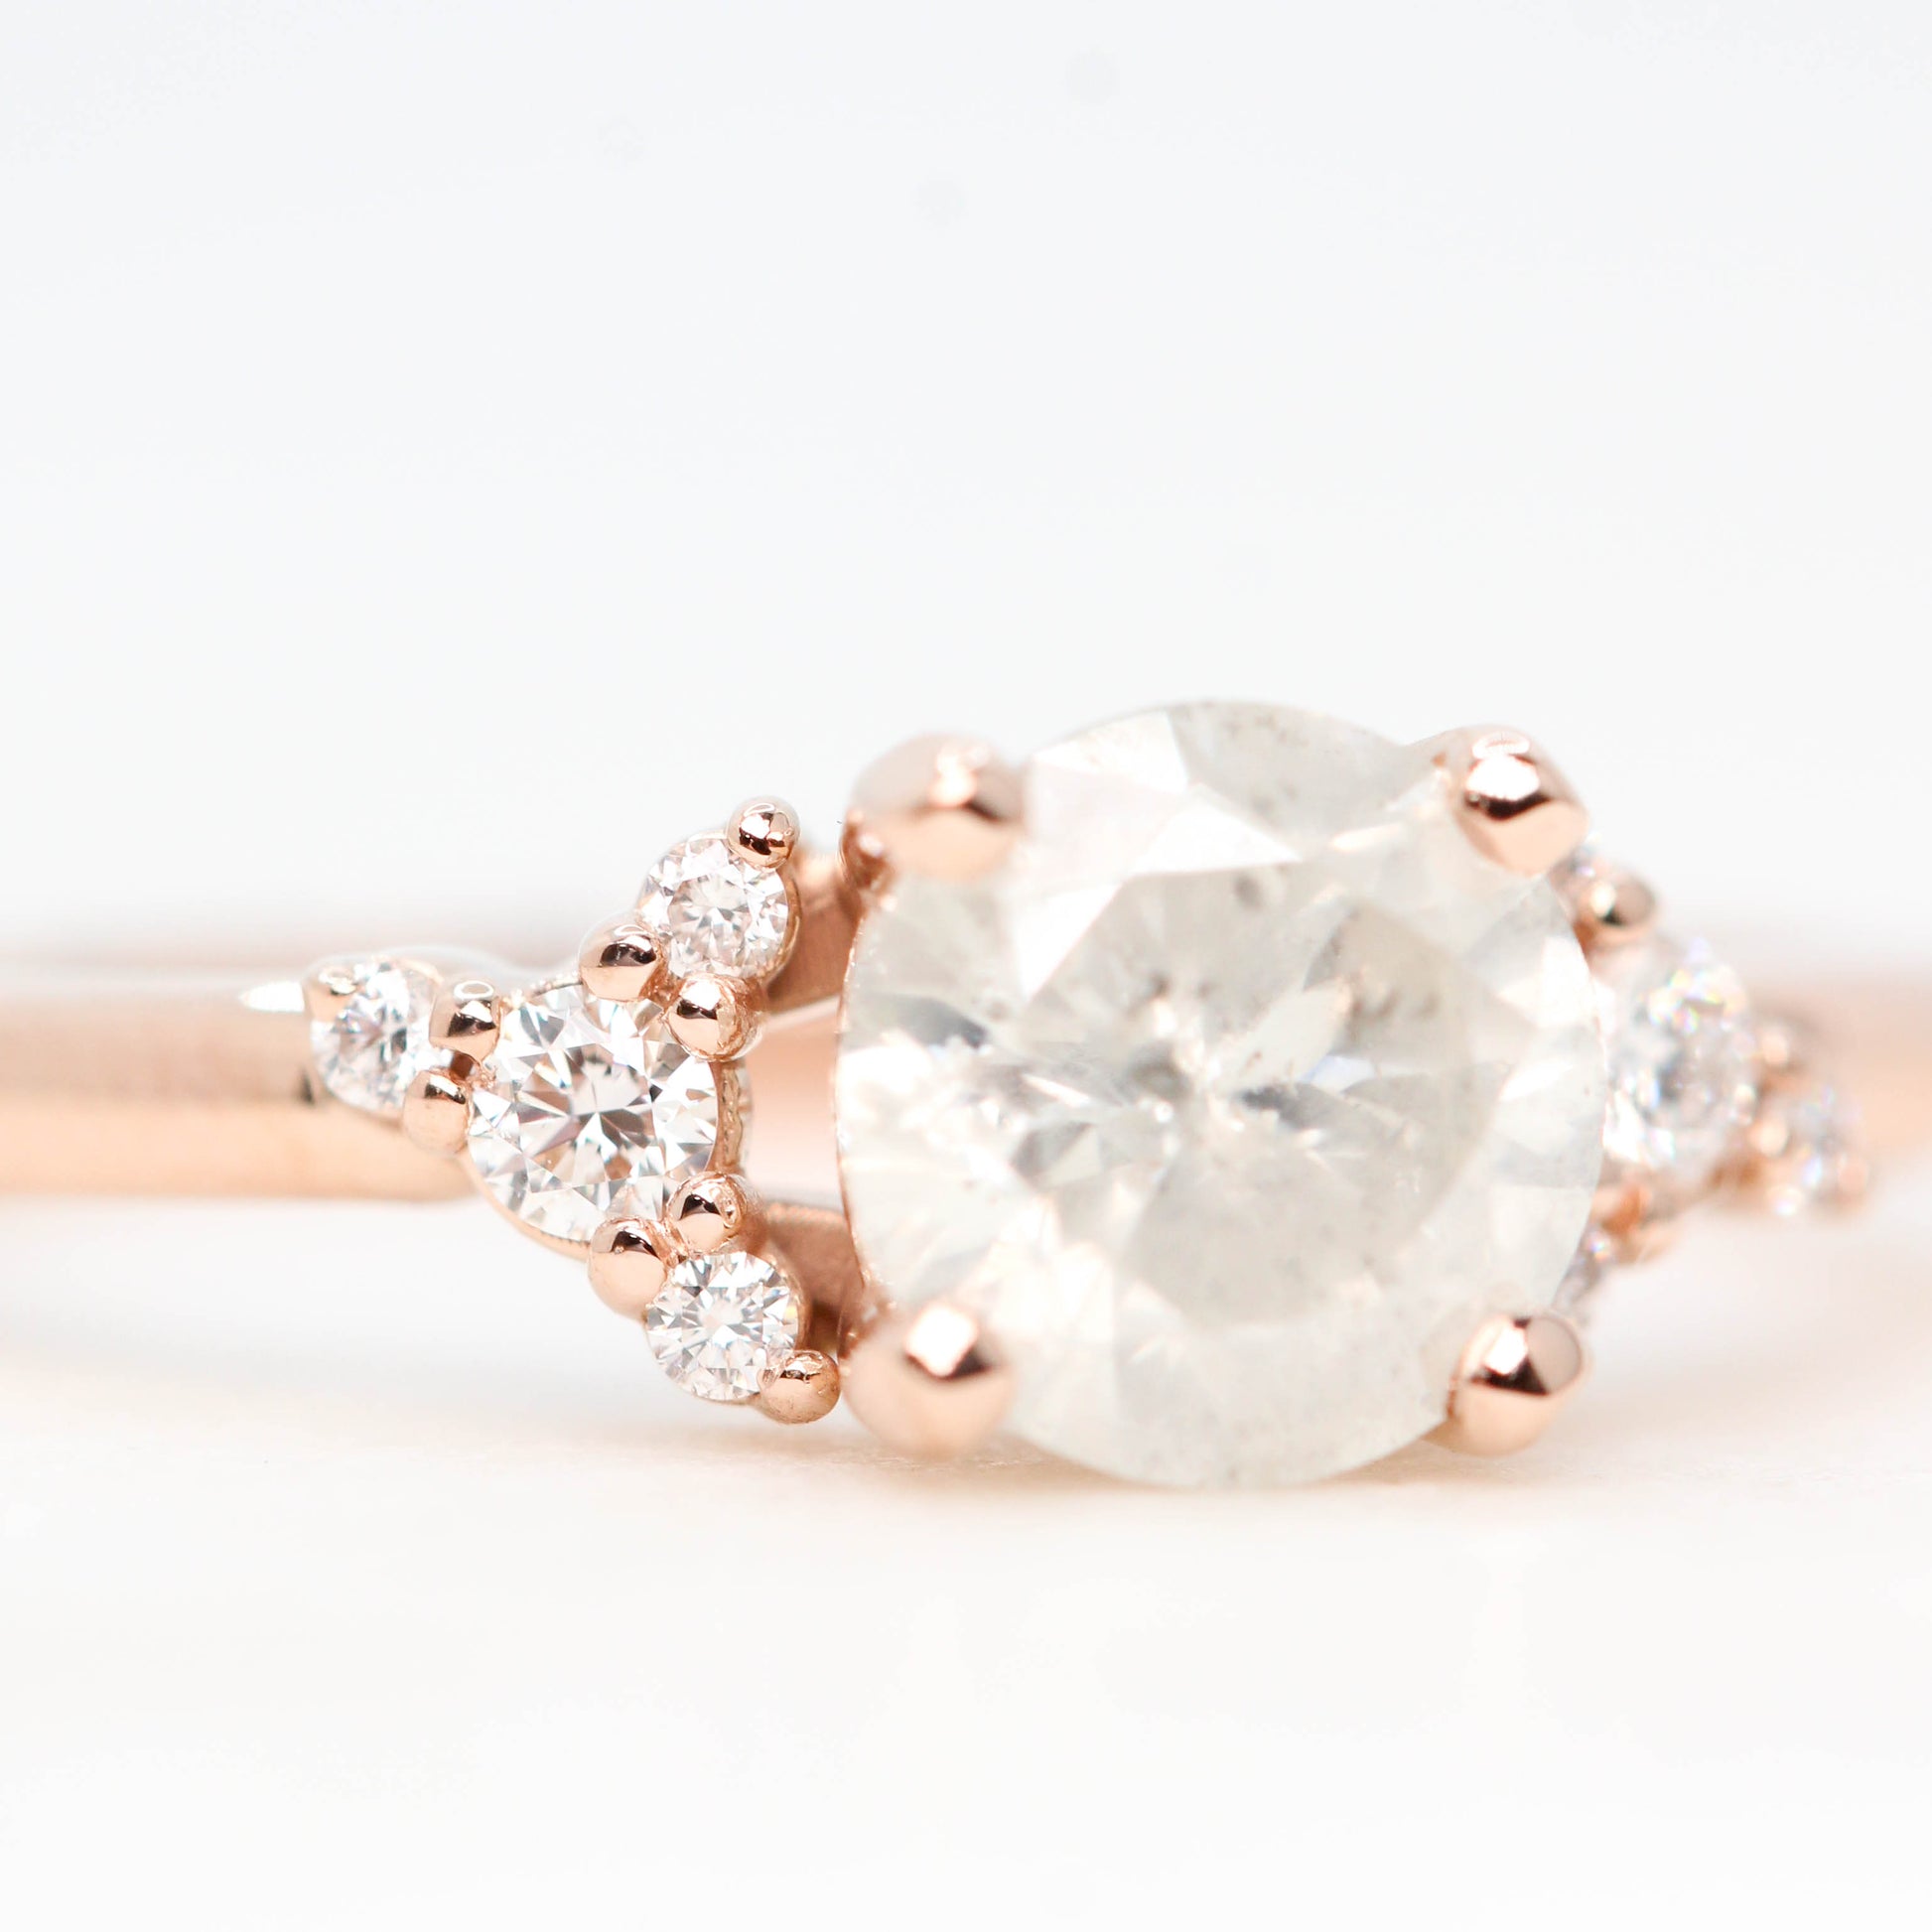 Marley Ring with a 1.05 Carat White Celestial Round Diamond and White Accent Diamonds in 14k Rose Gold - Ready to Size and Ship - Midwinter Co. Alternative Bridal Rings and Modern Fine Jewelry